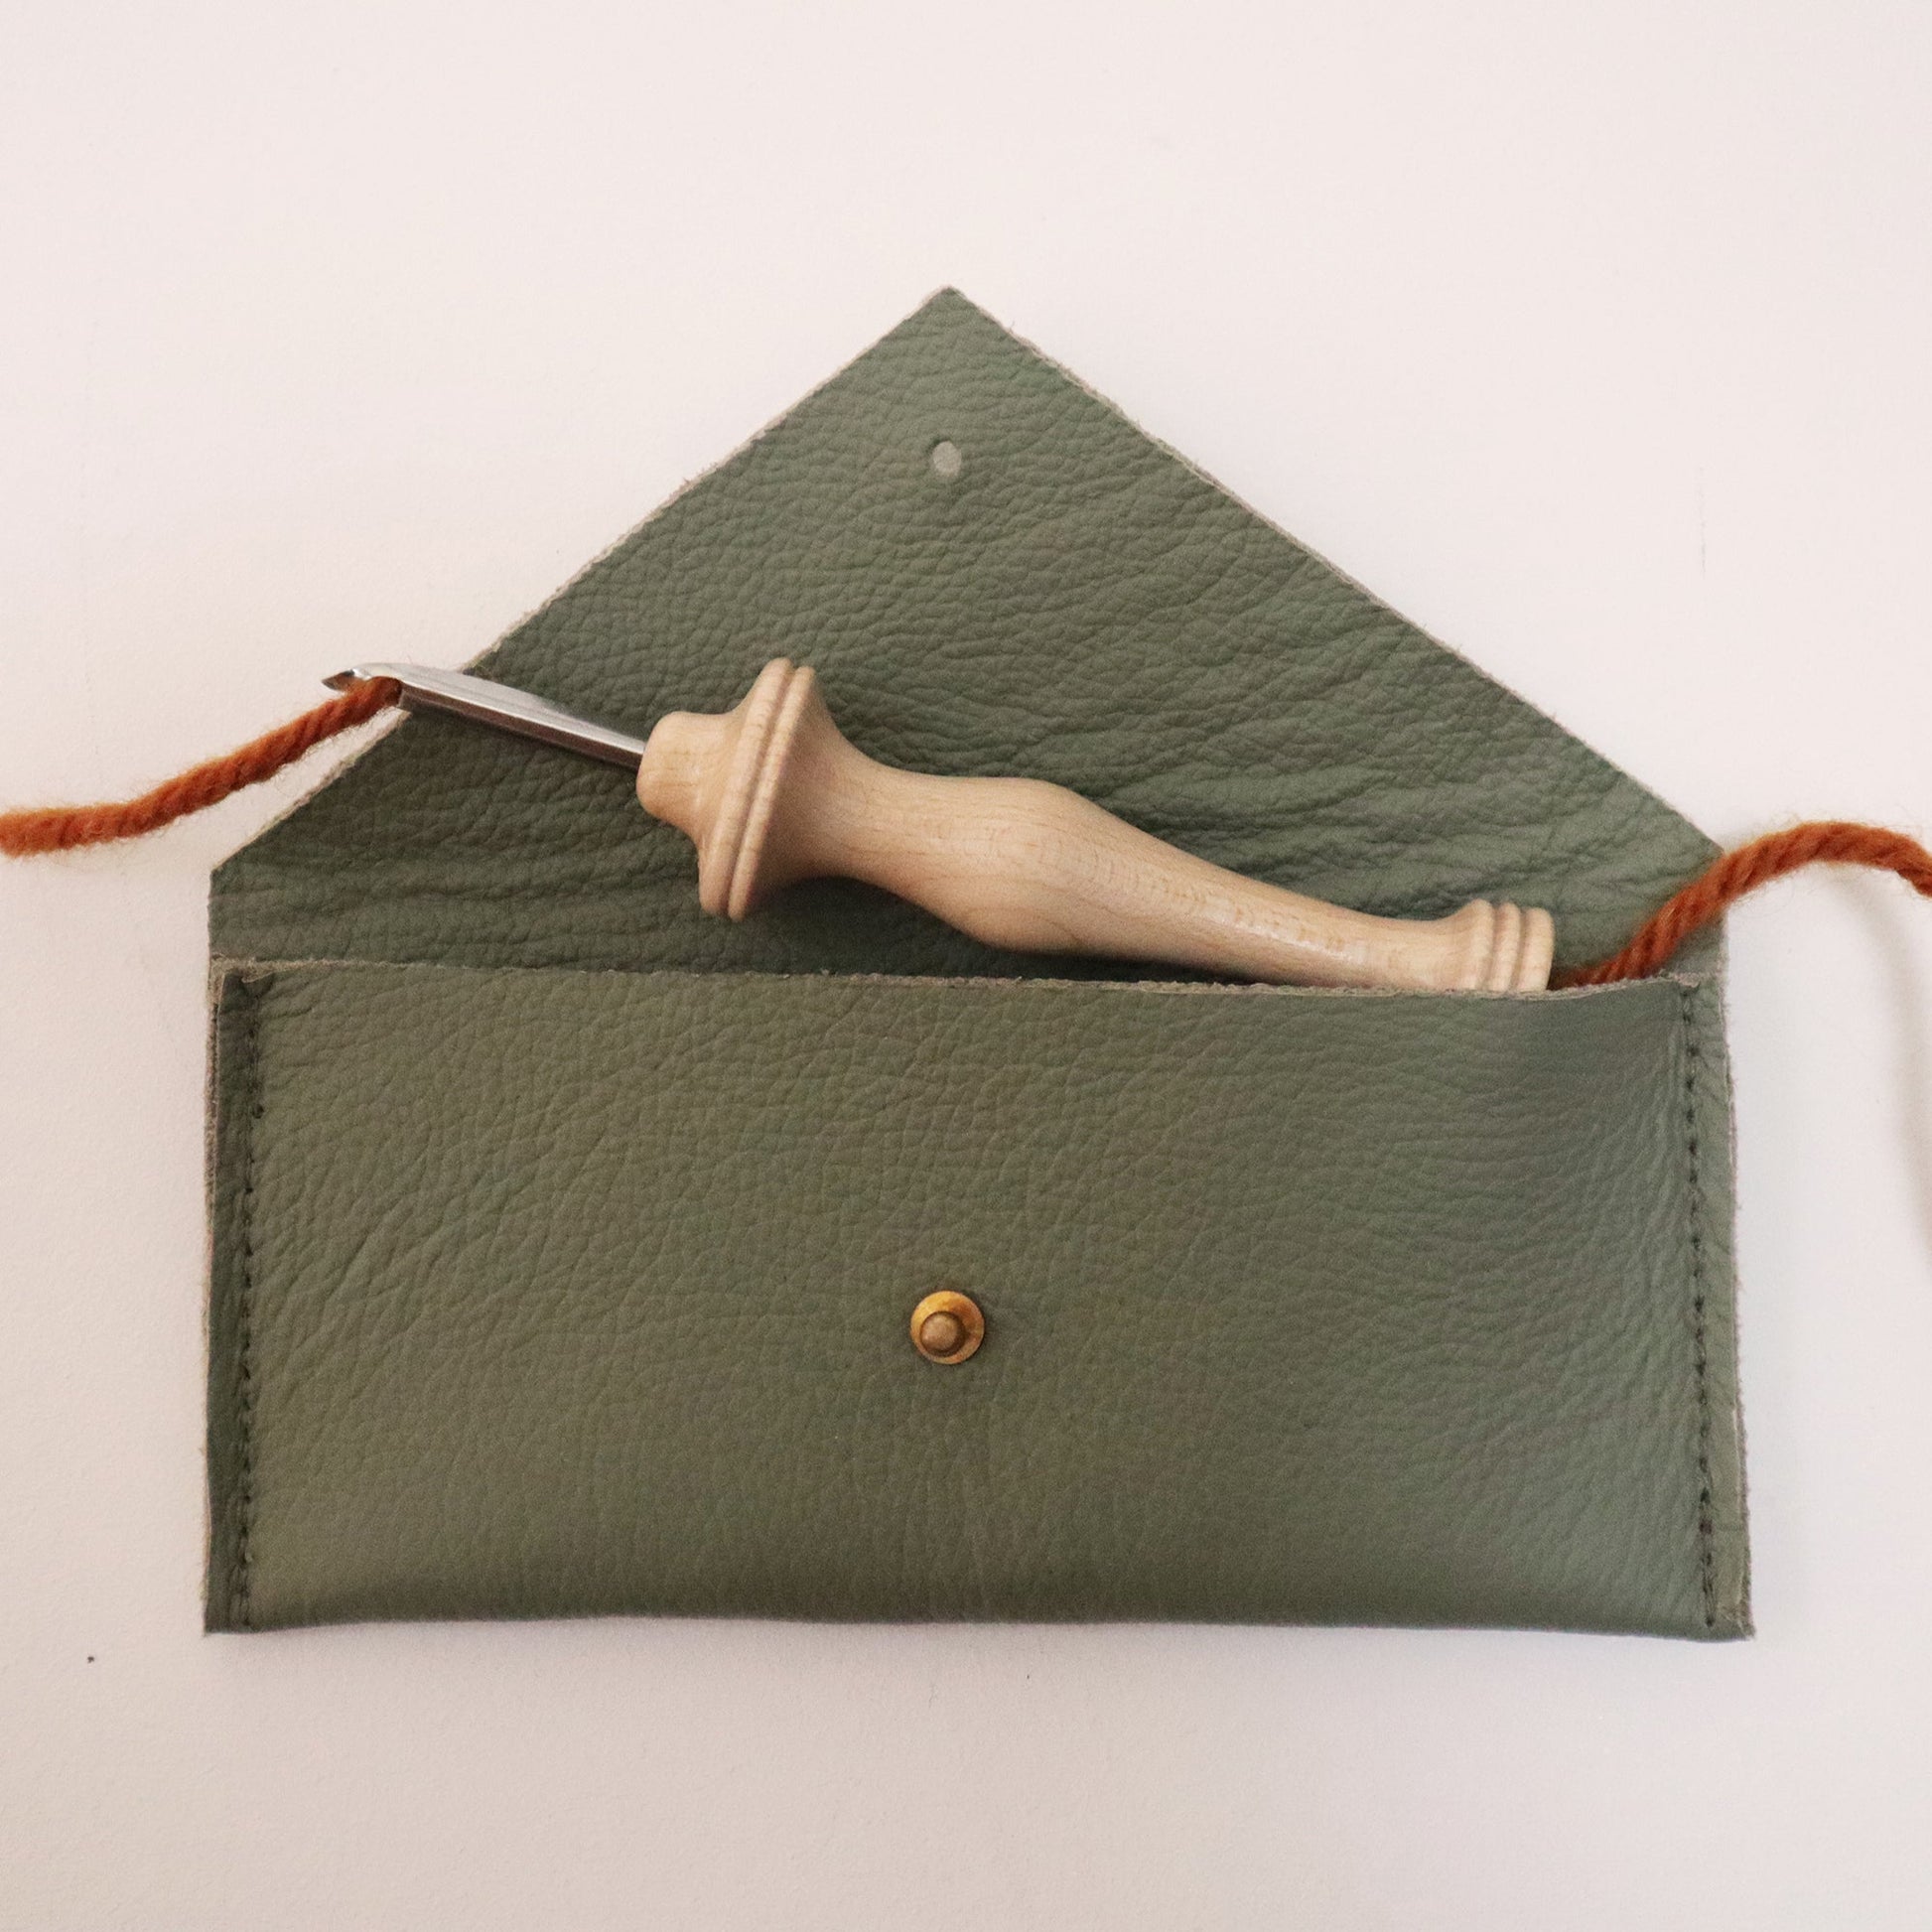 Leather Punch Needle Case - Handmade in England - Stitch Happy.